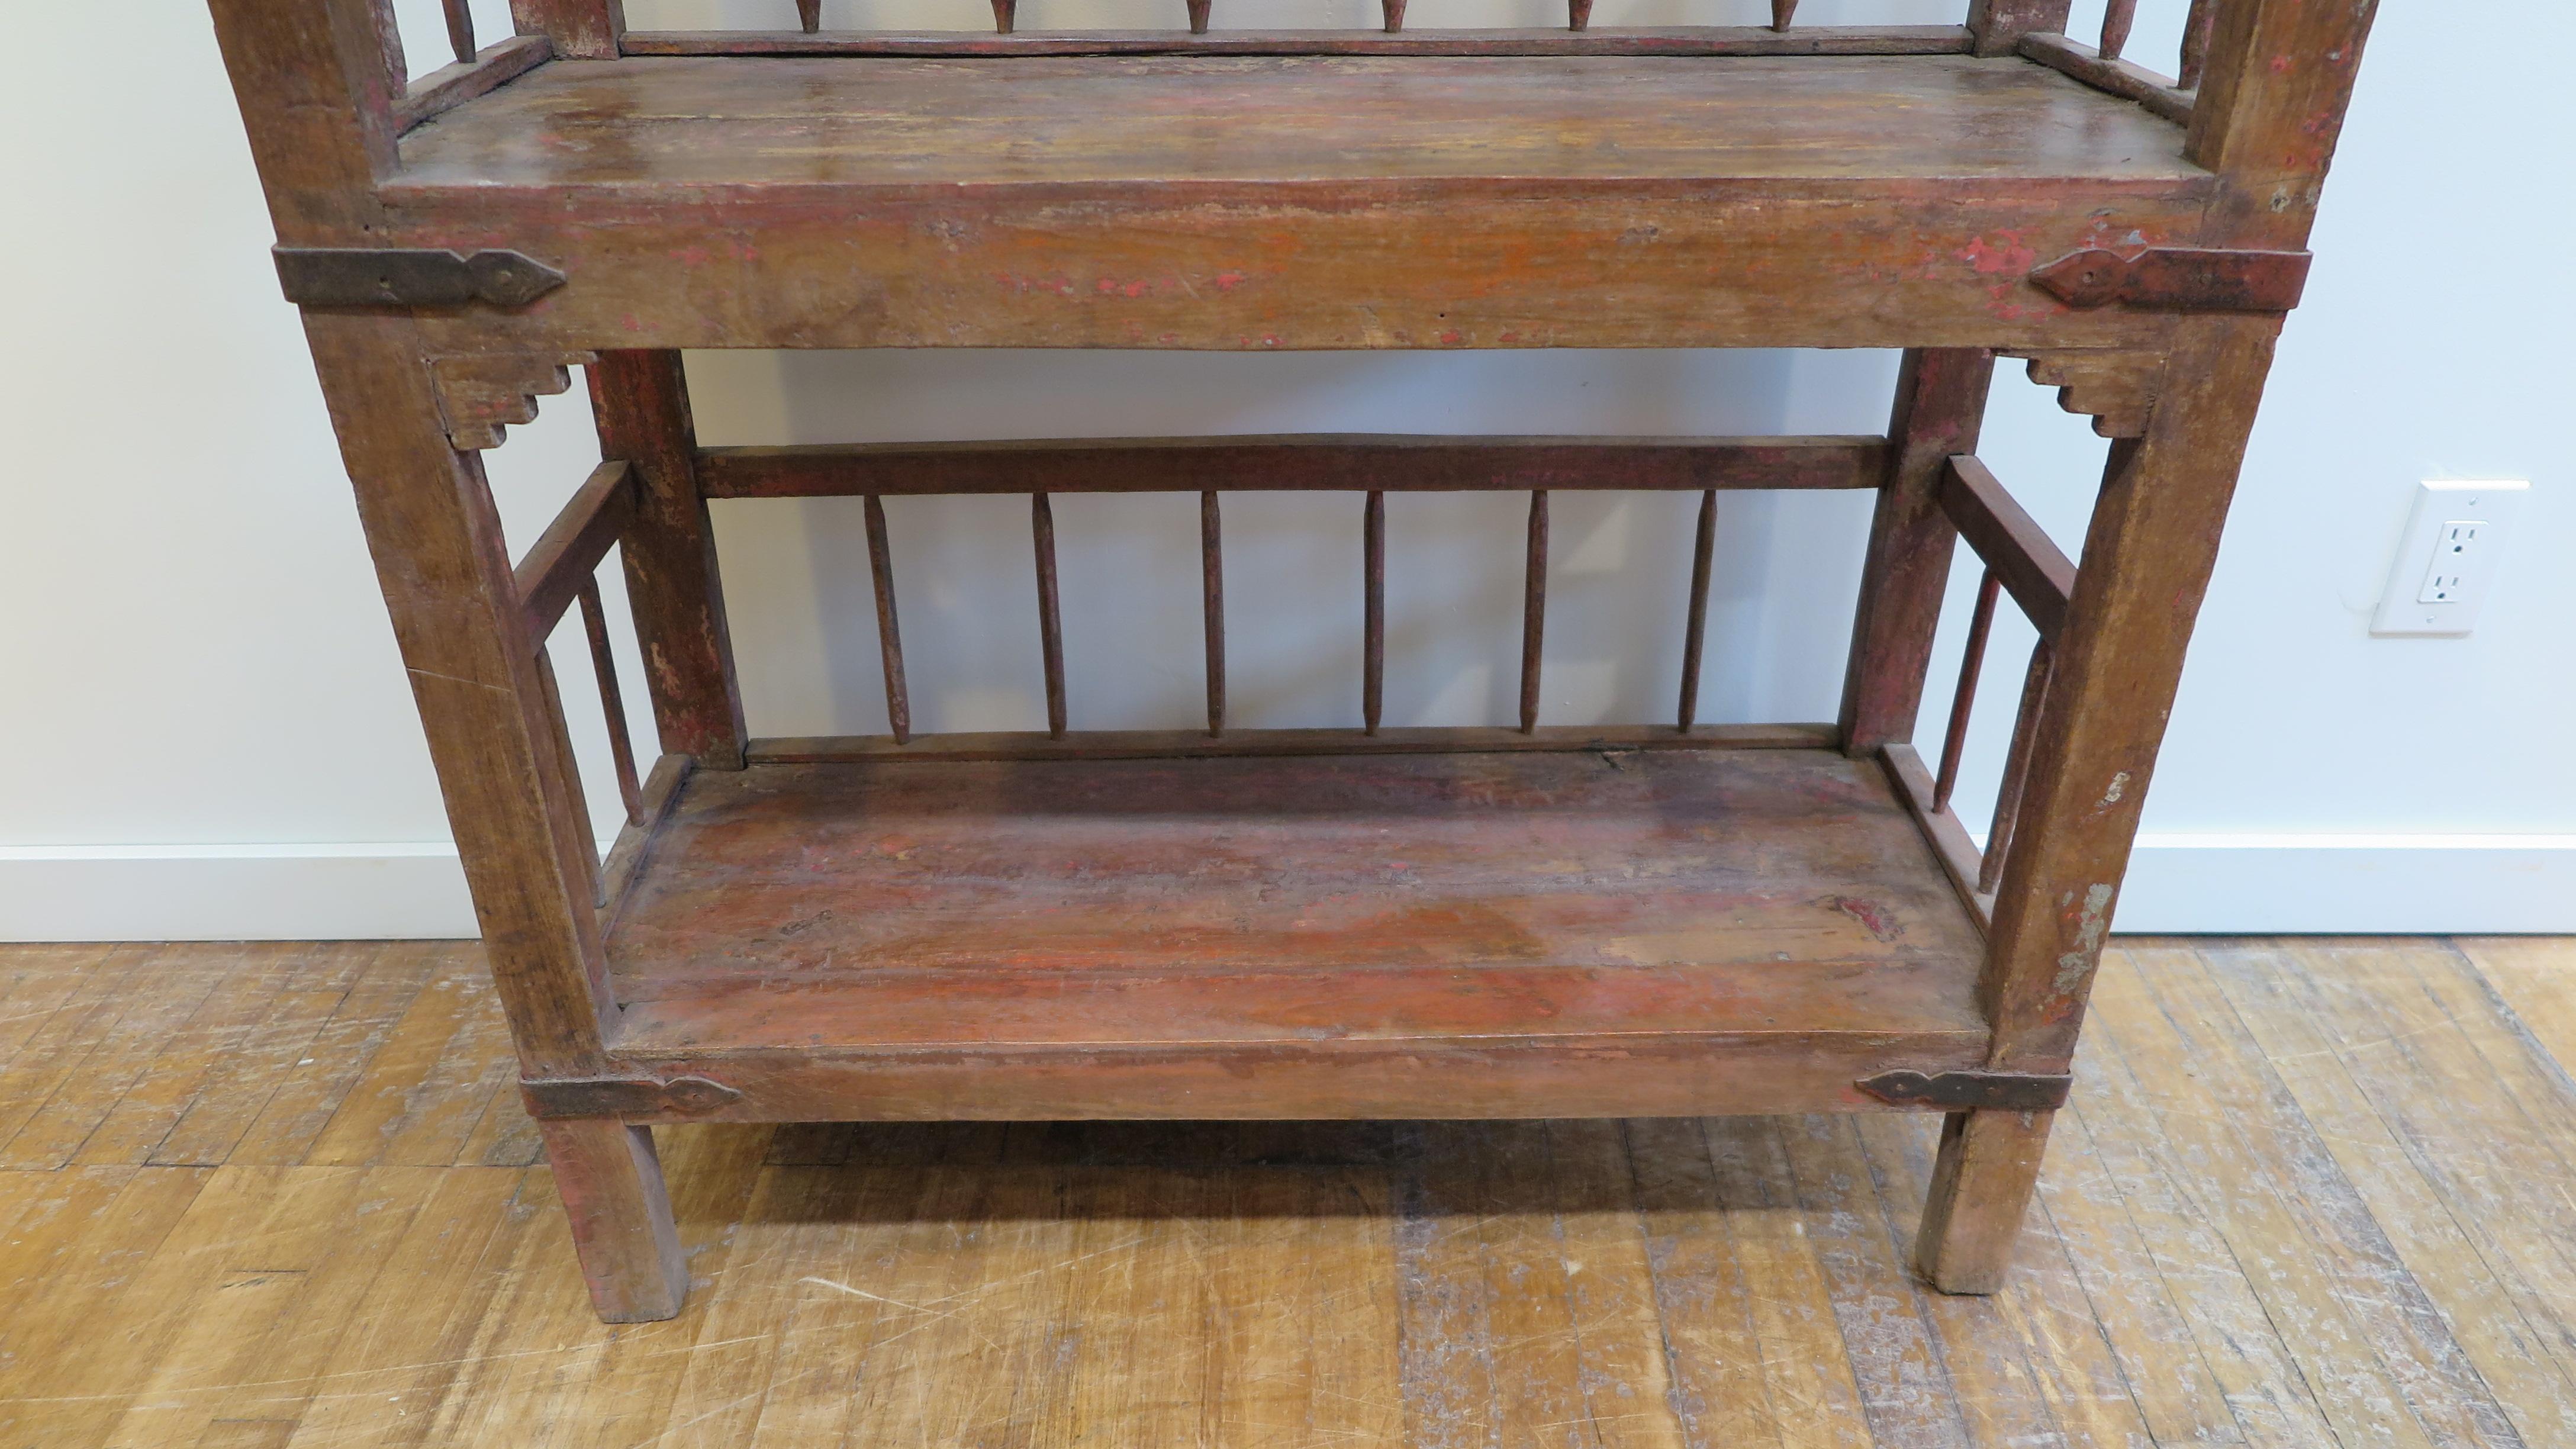 Wood Rustic Bookcase Etagere Shelf For Sale